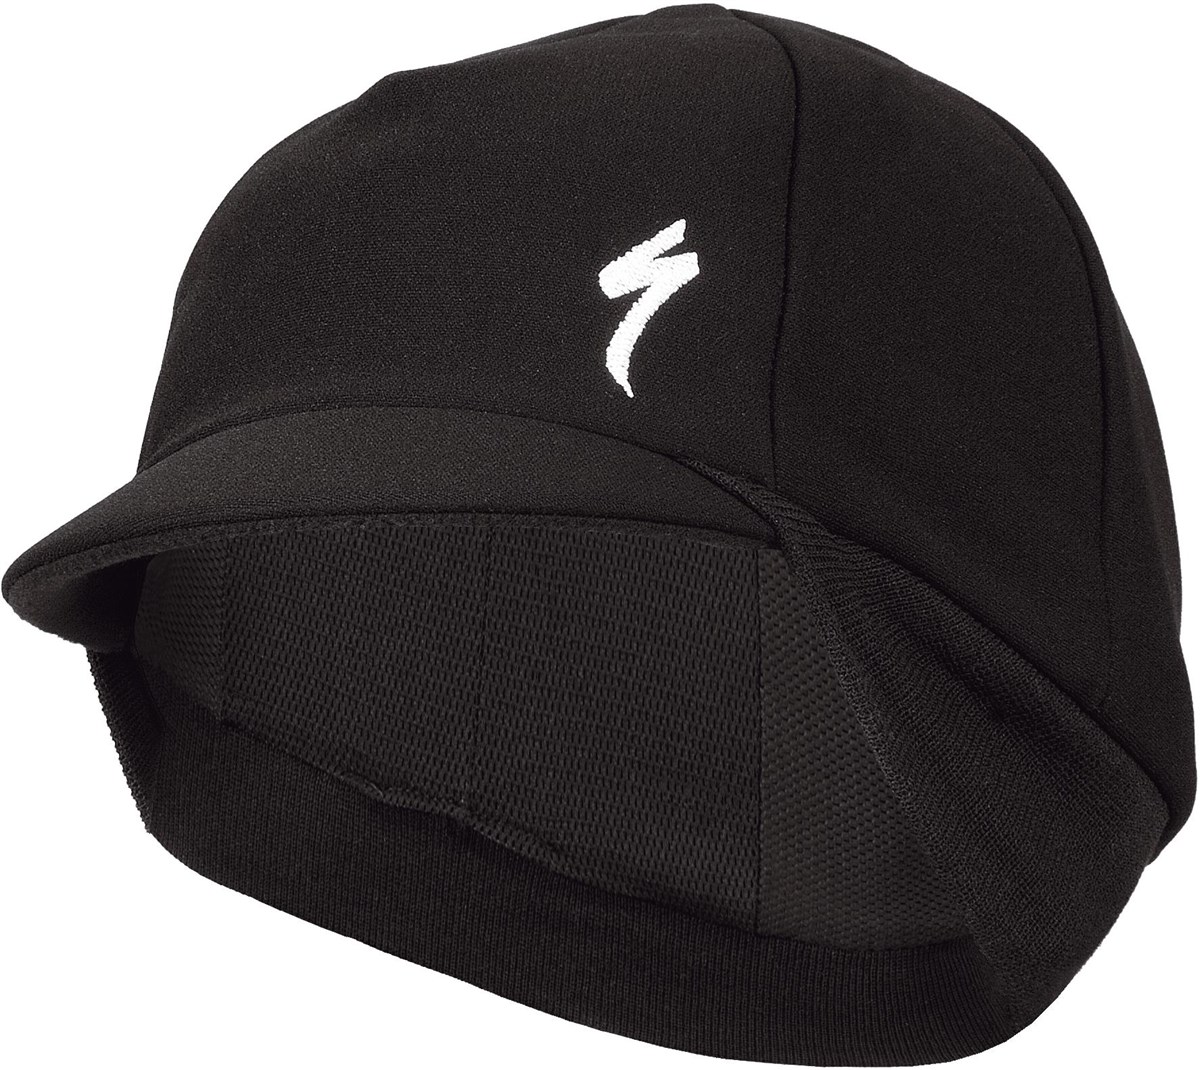 Specialized Winter Cap SS17